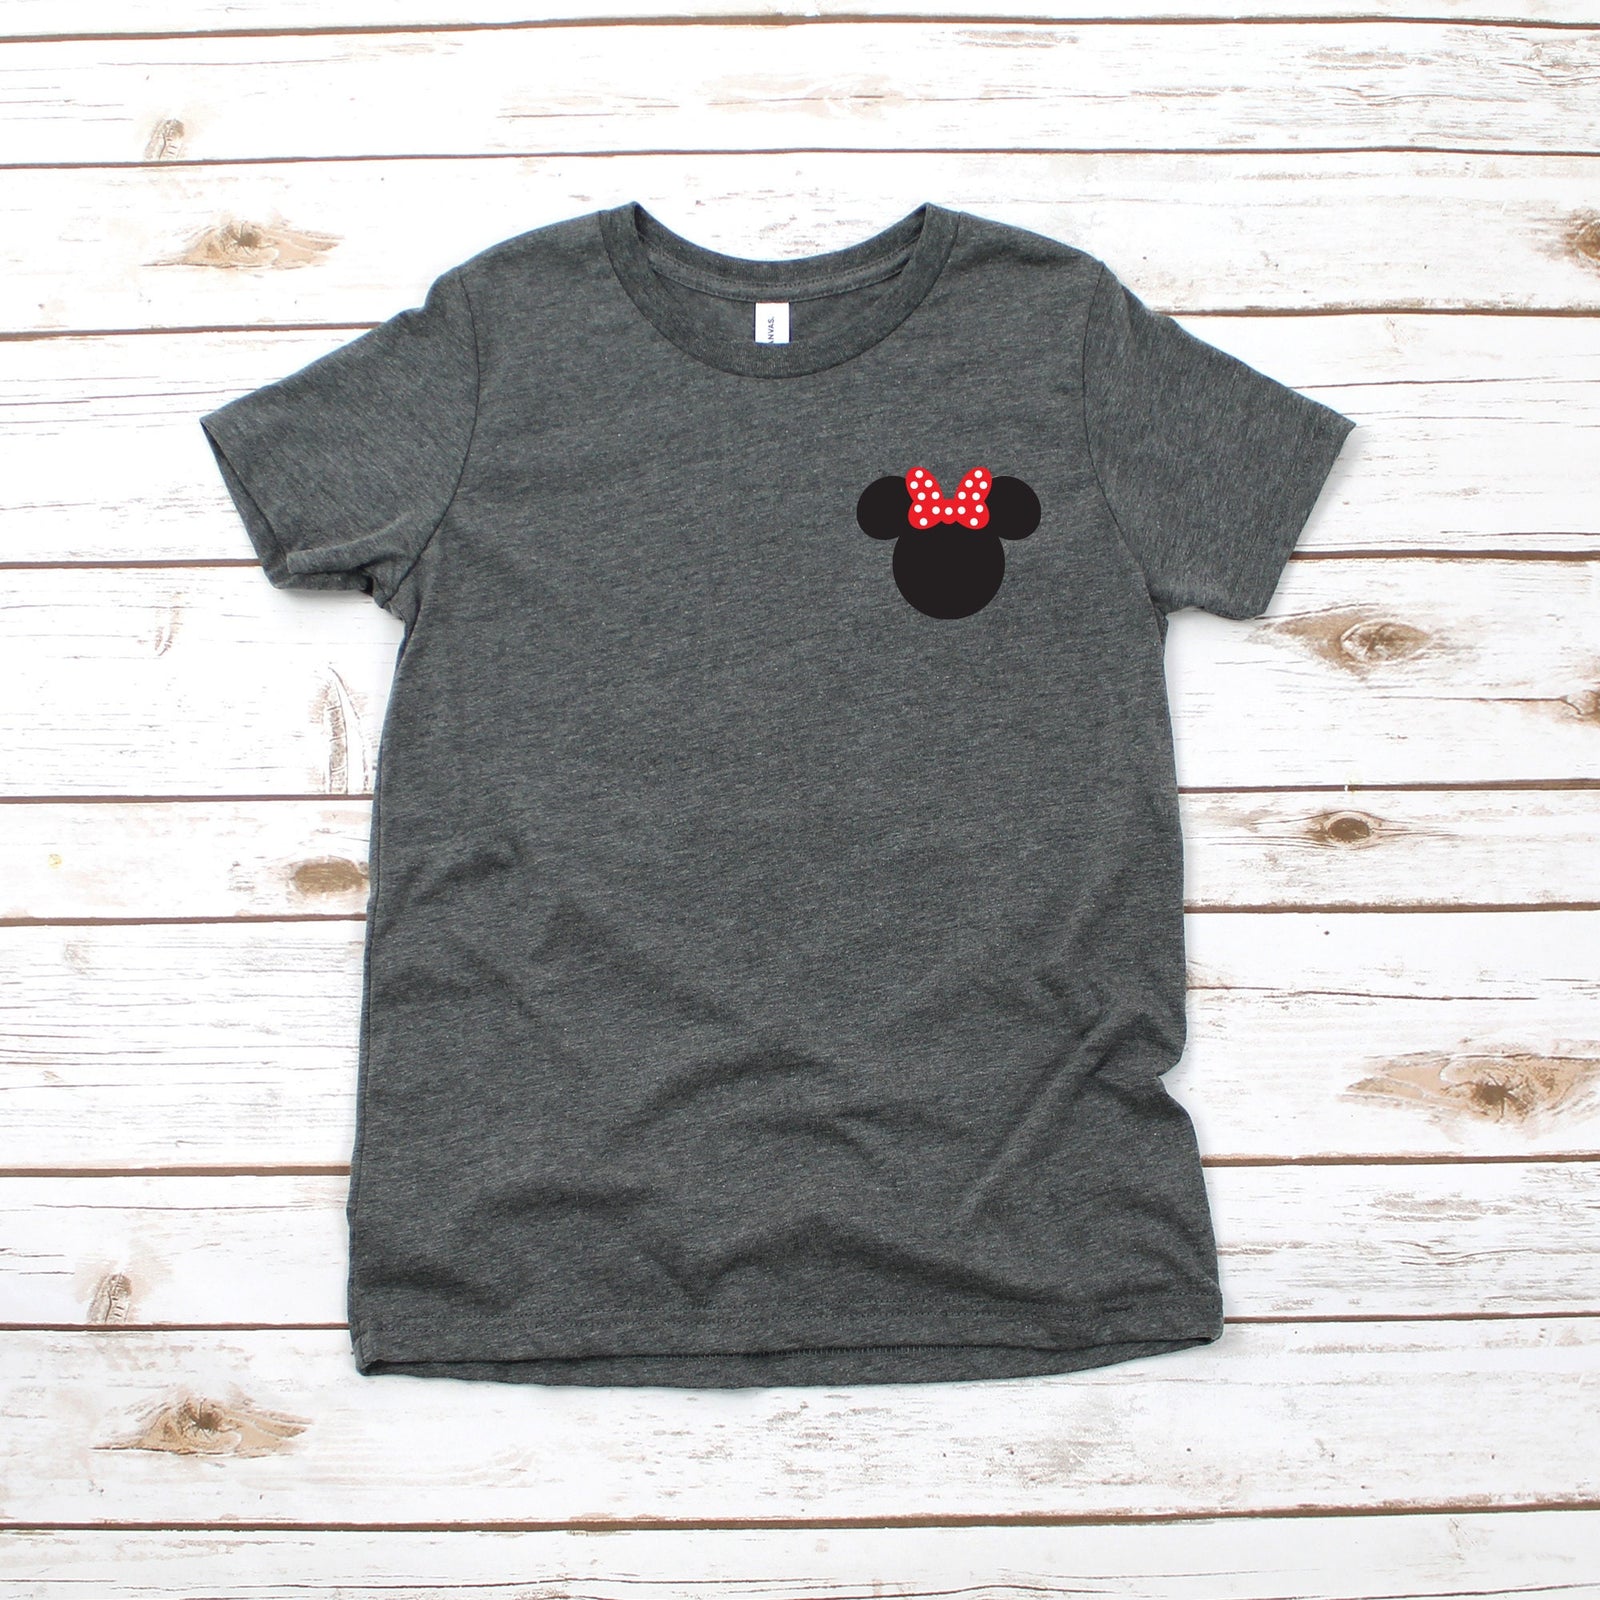 Minnie Mouse Disney Kids Shirt - Infant Toddler & Youth Shirt -Left Chest Small Pocket Size Logo